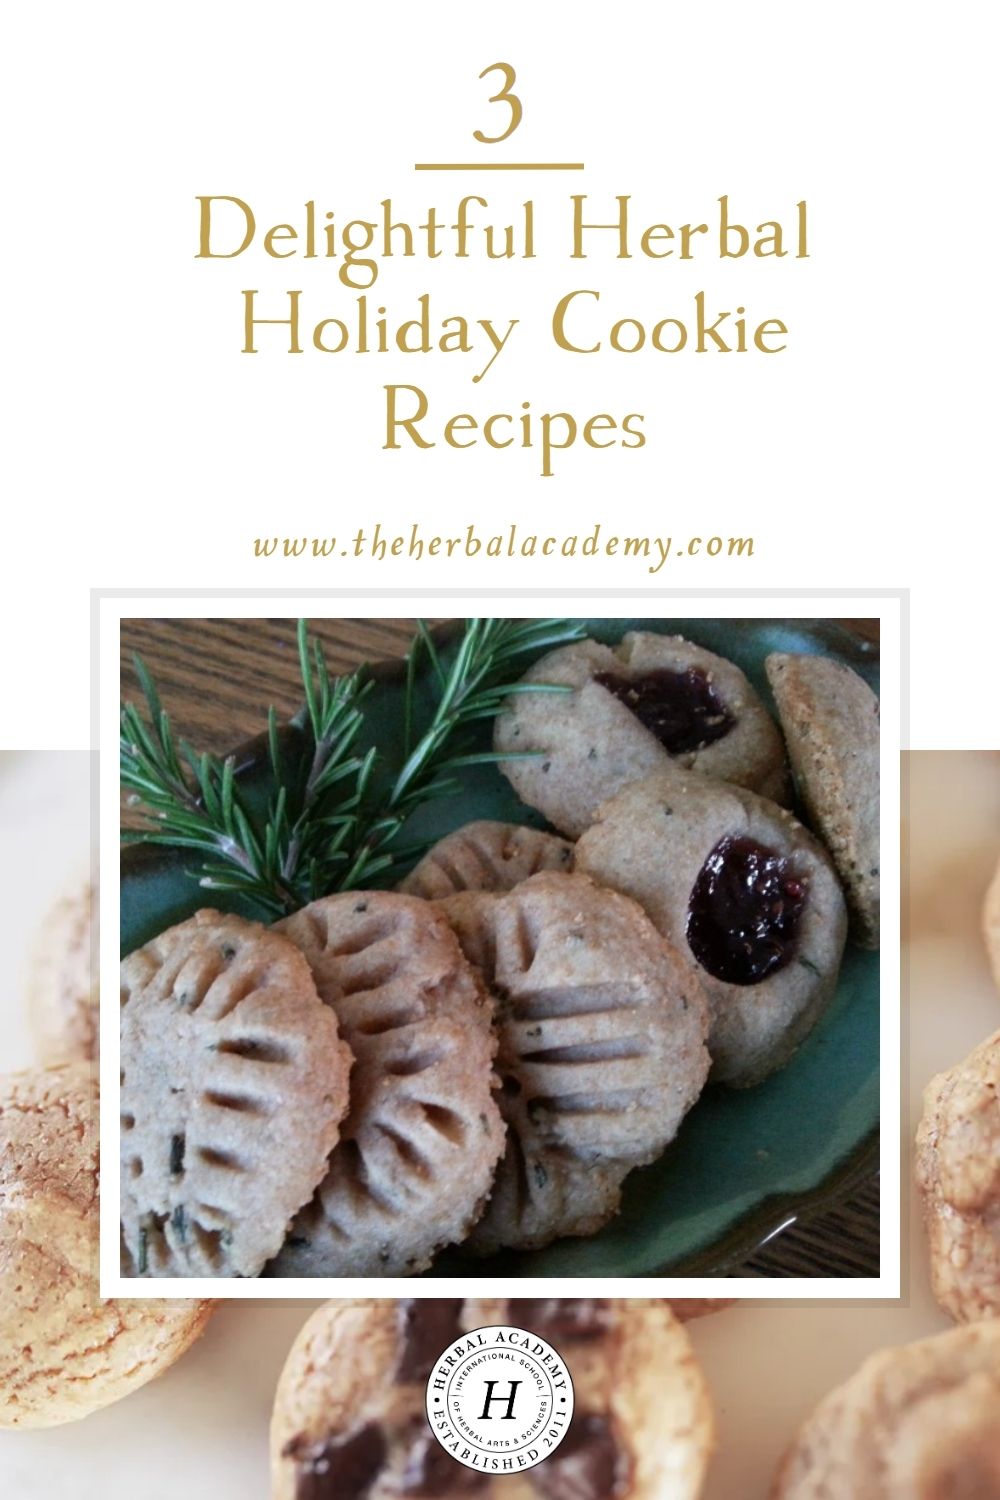 3 Delightful Herbal Holiday Cookie Recipes | Herbal Academy | Remember the simple joys of life and gather in the kitchen to whip up a batch or two of cookies! Here are 3 herbal holiday cookie recipes for you to try!